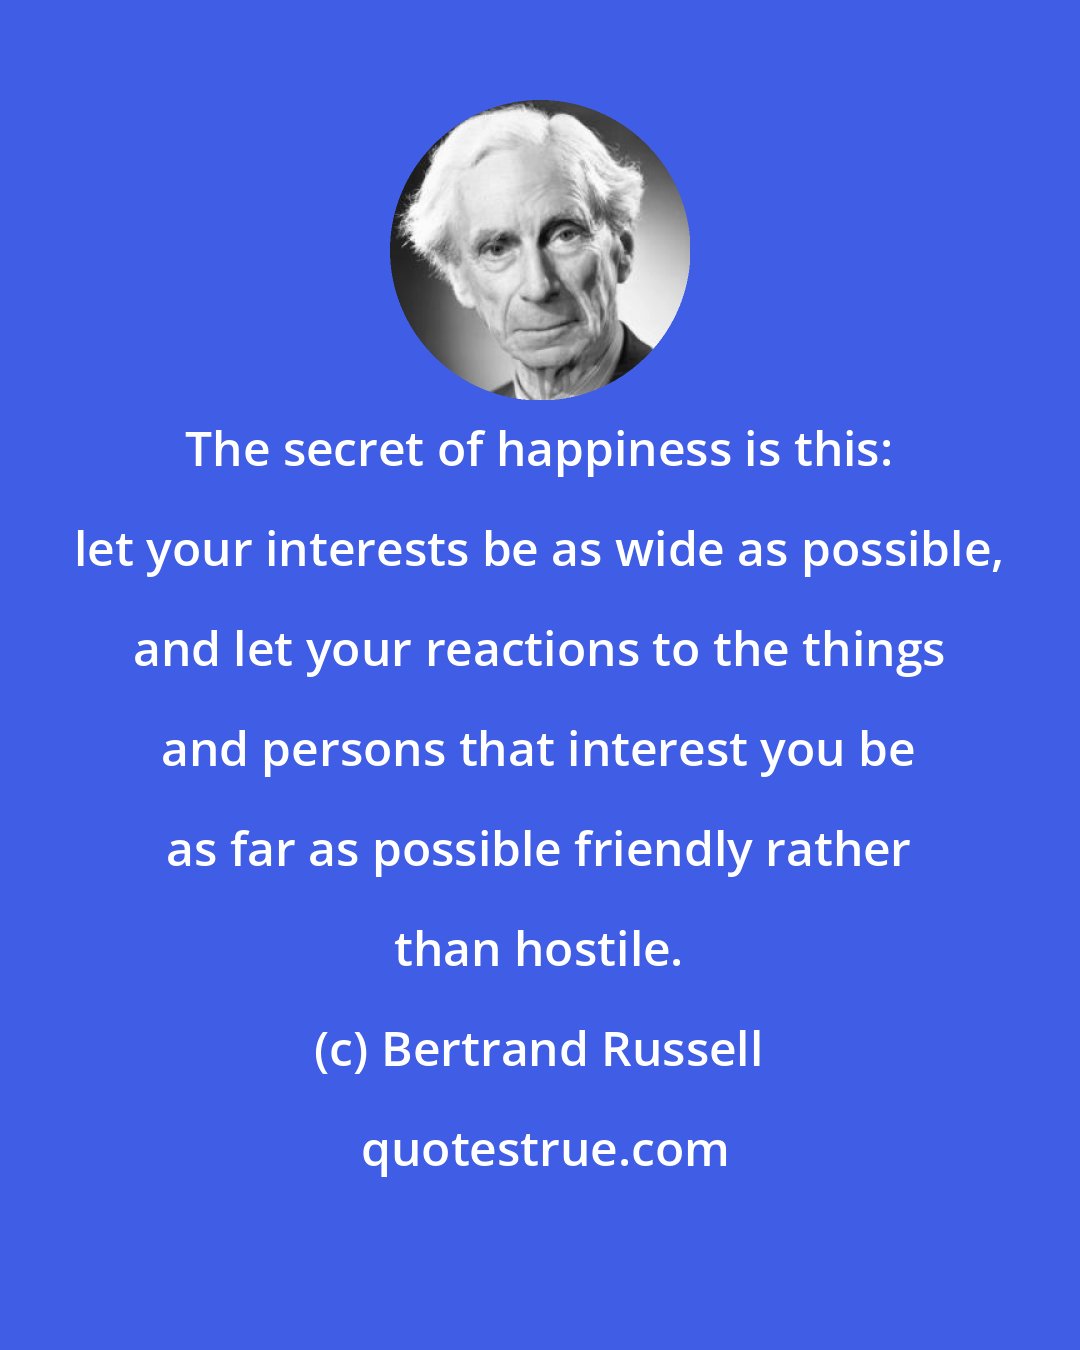 Bertrand Russell: The secret of happiness is this: let your interests be as wide as possible, and let your reactions to the things and persons that interest you be as far as possible friendly rather than hostile.